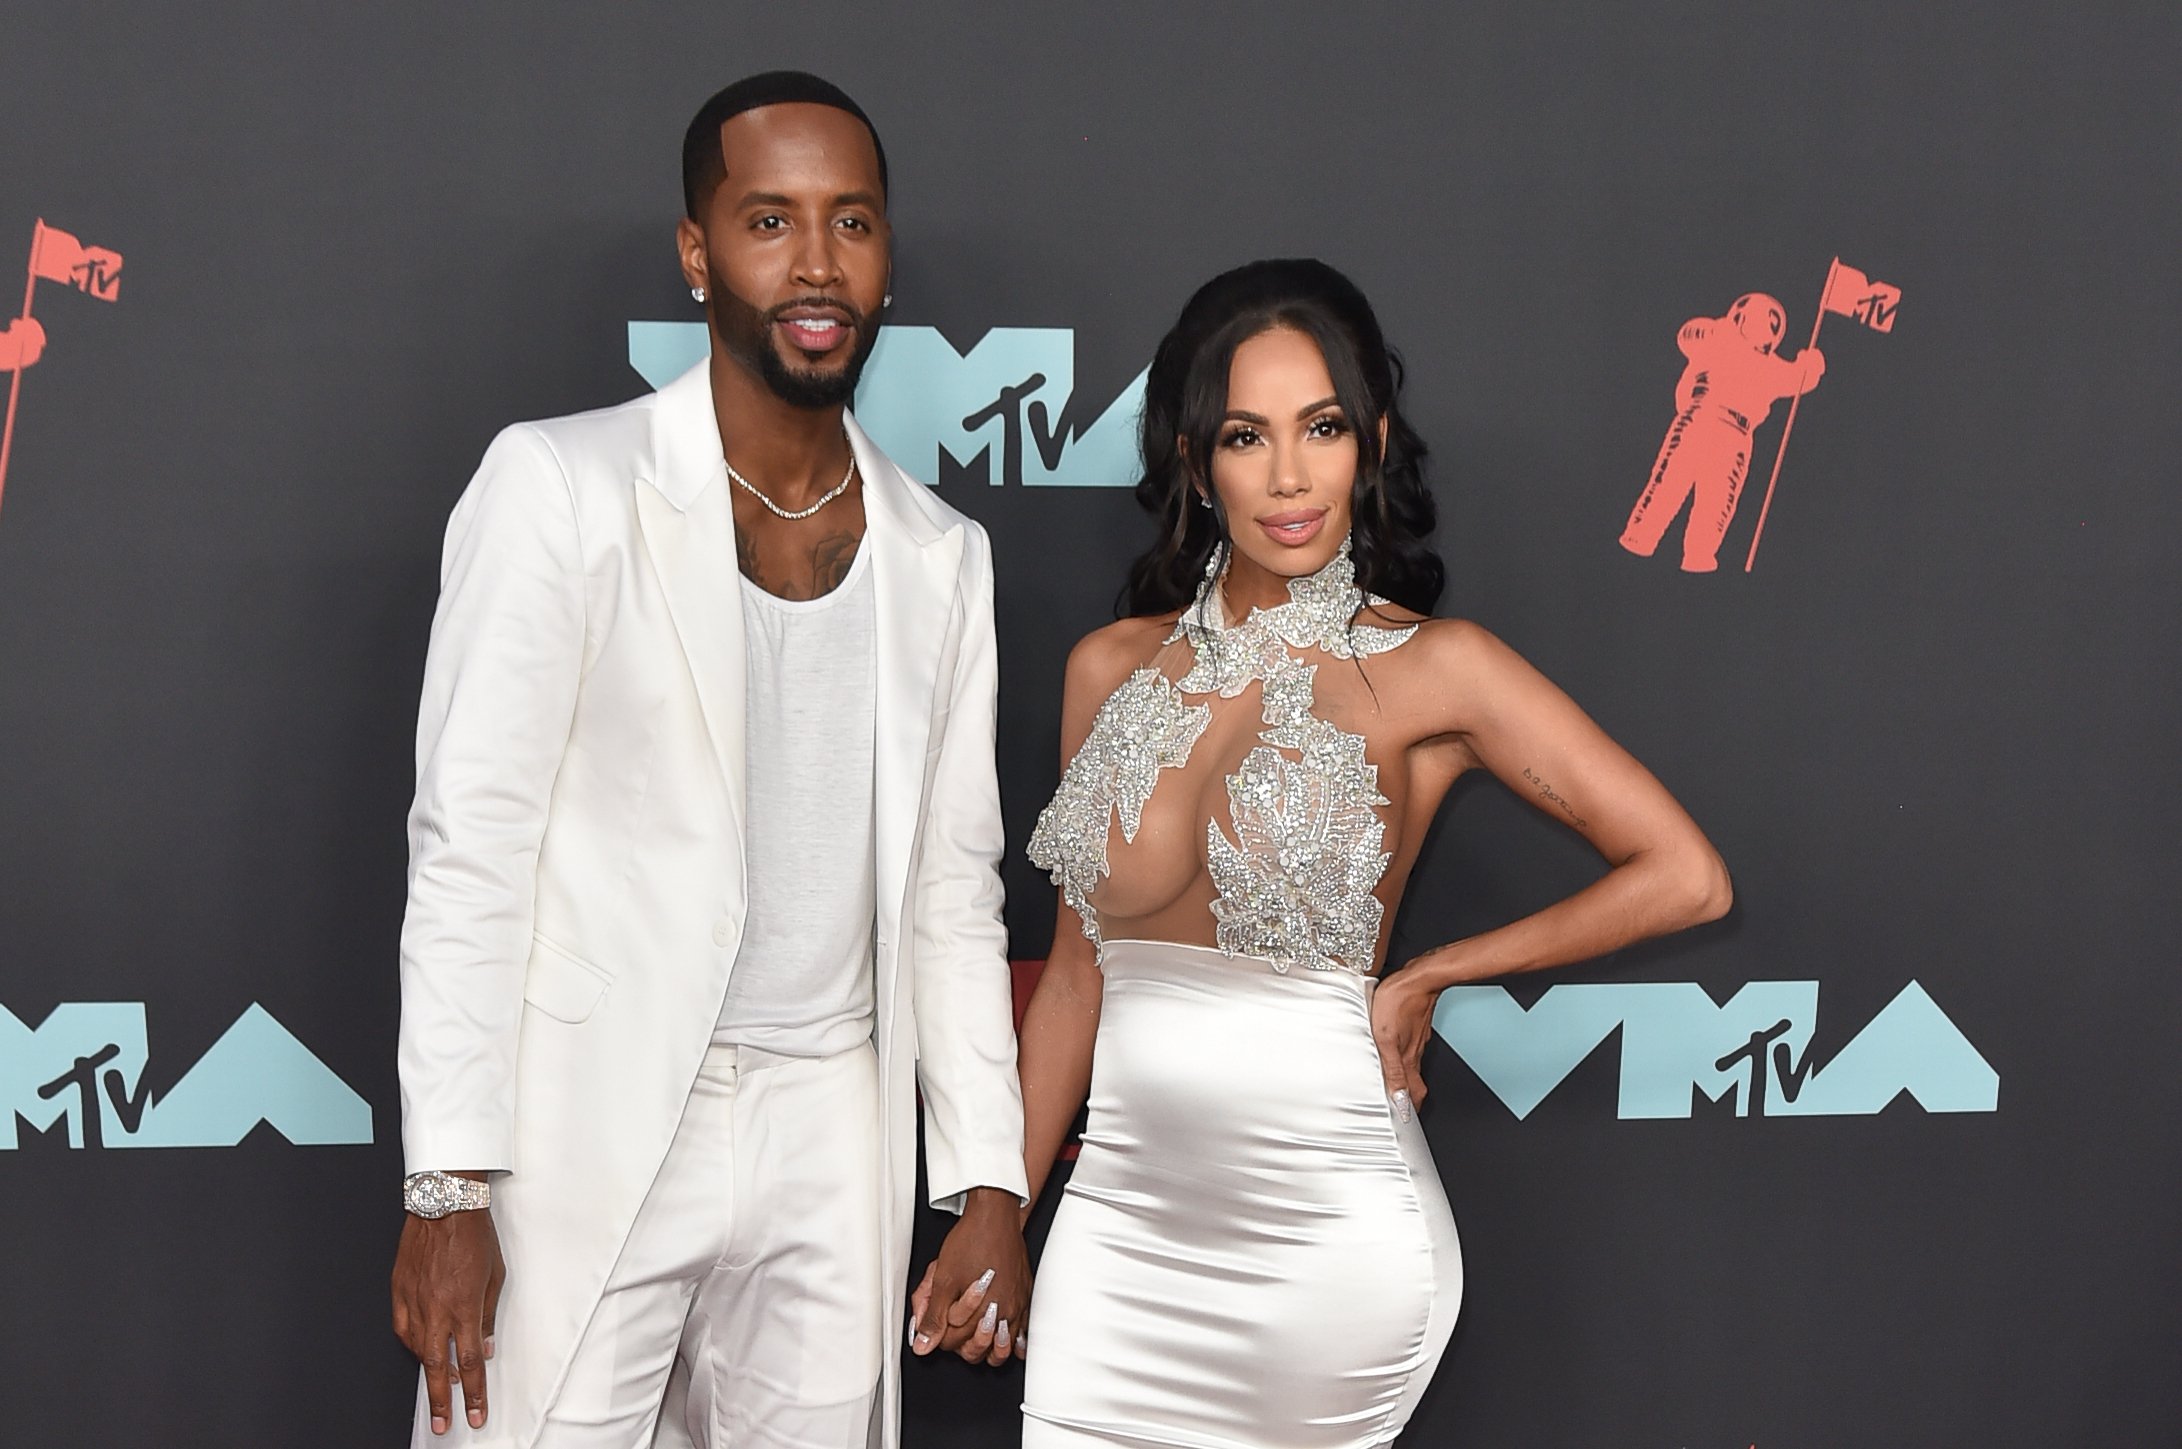 Safaree Samuels and Erica Mena Samuels at the 2019 MTV Video Music Awards at Prudential Center on August 26, 2019 in Newark, New Jersey | Source: Getty Images